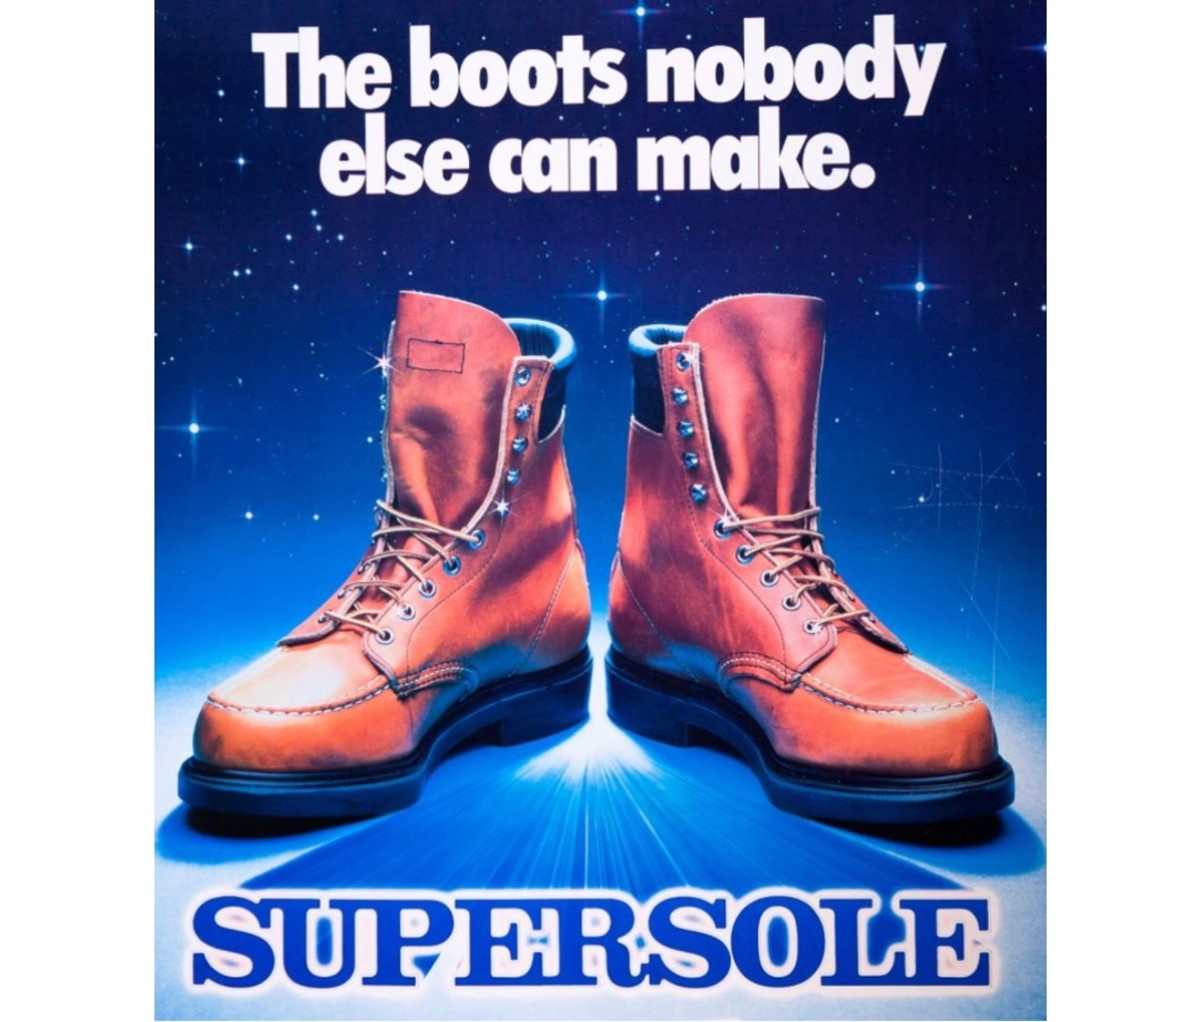 Red Wing even recycled their ads for the new Same Old campaign.